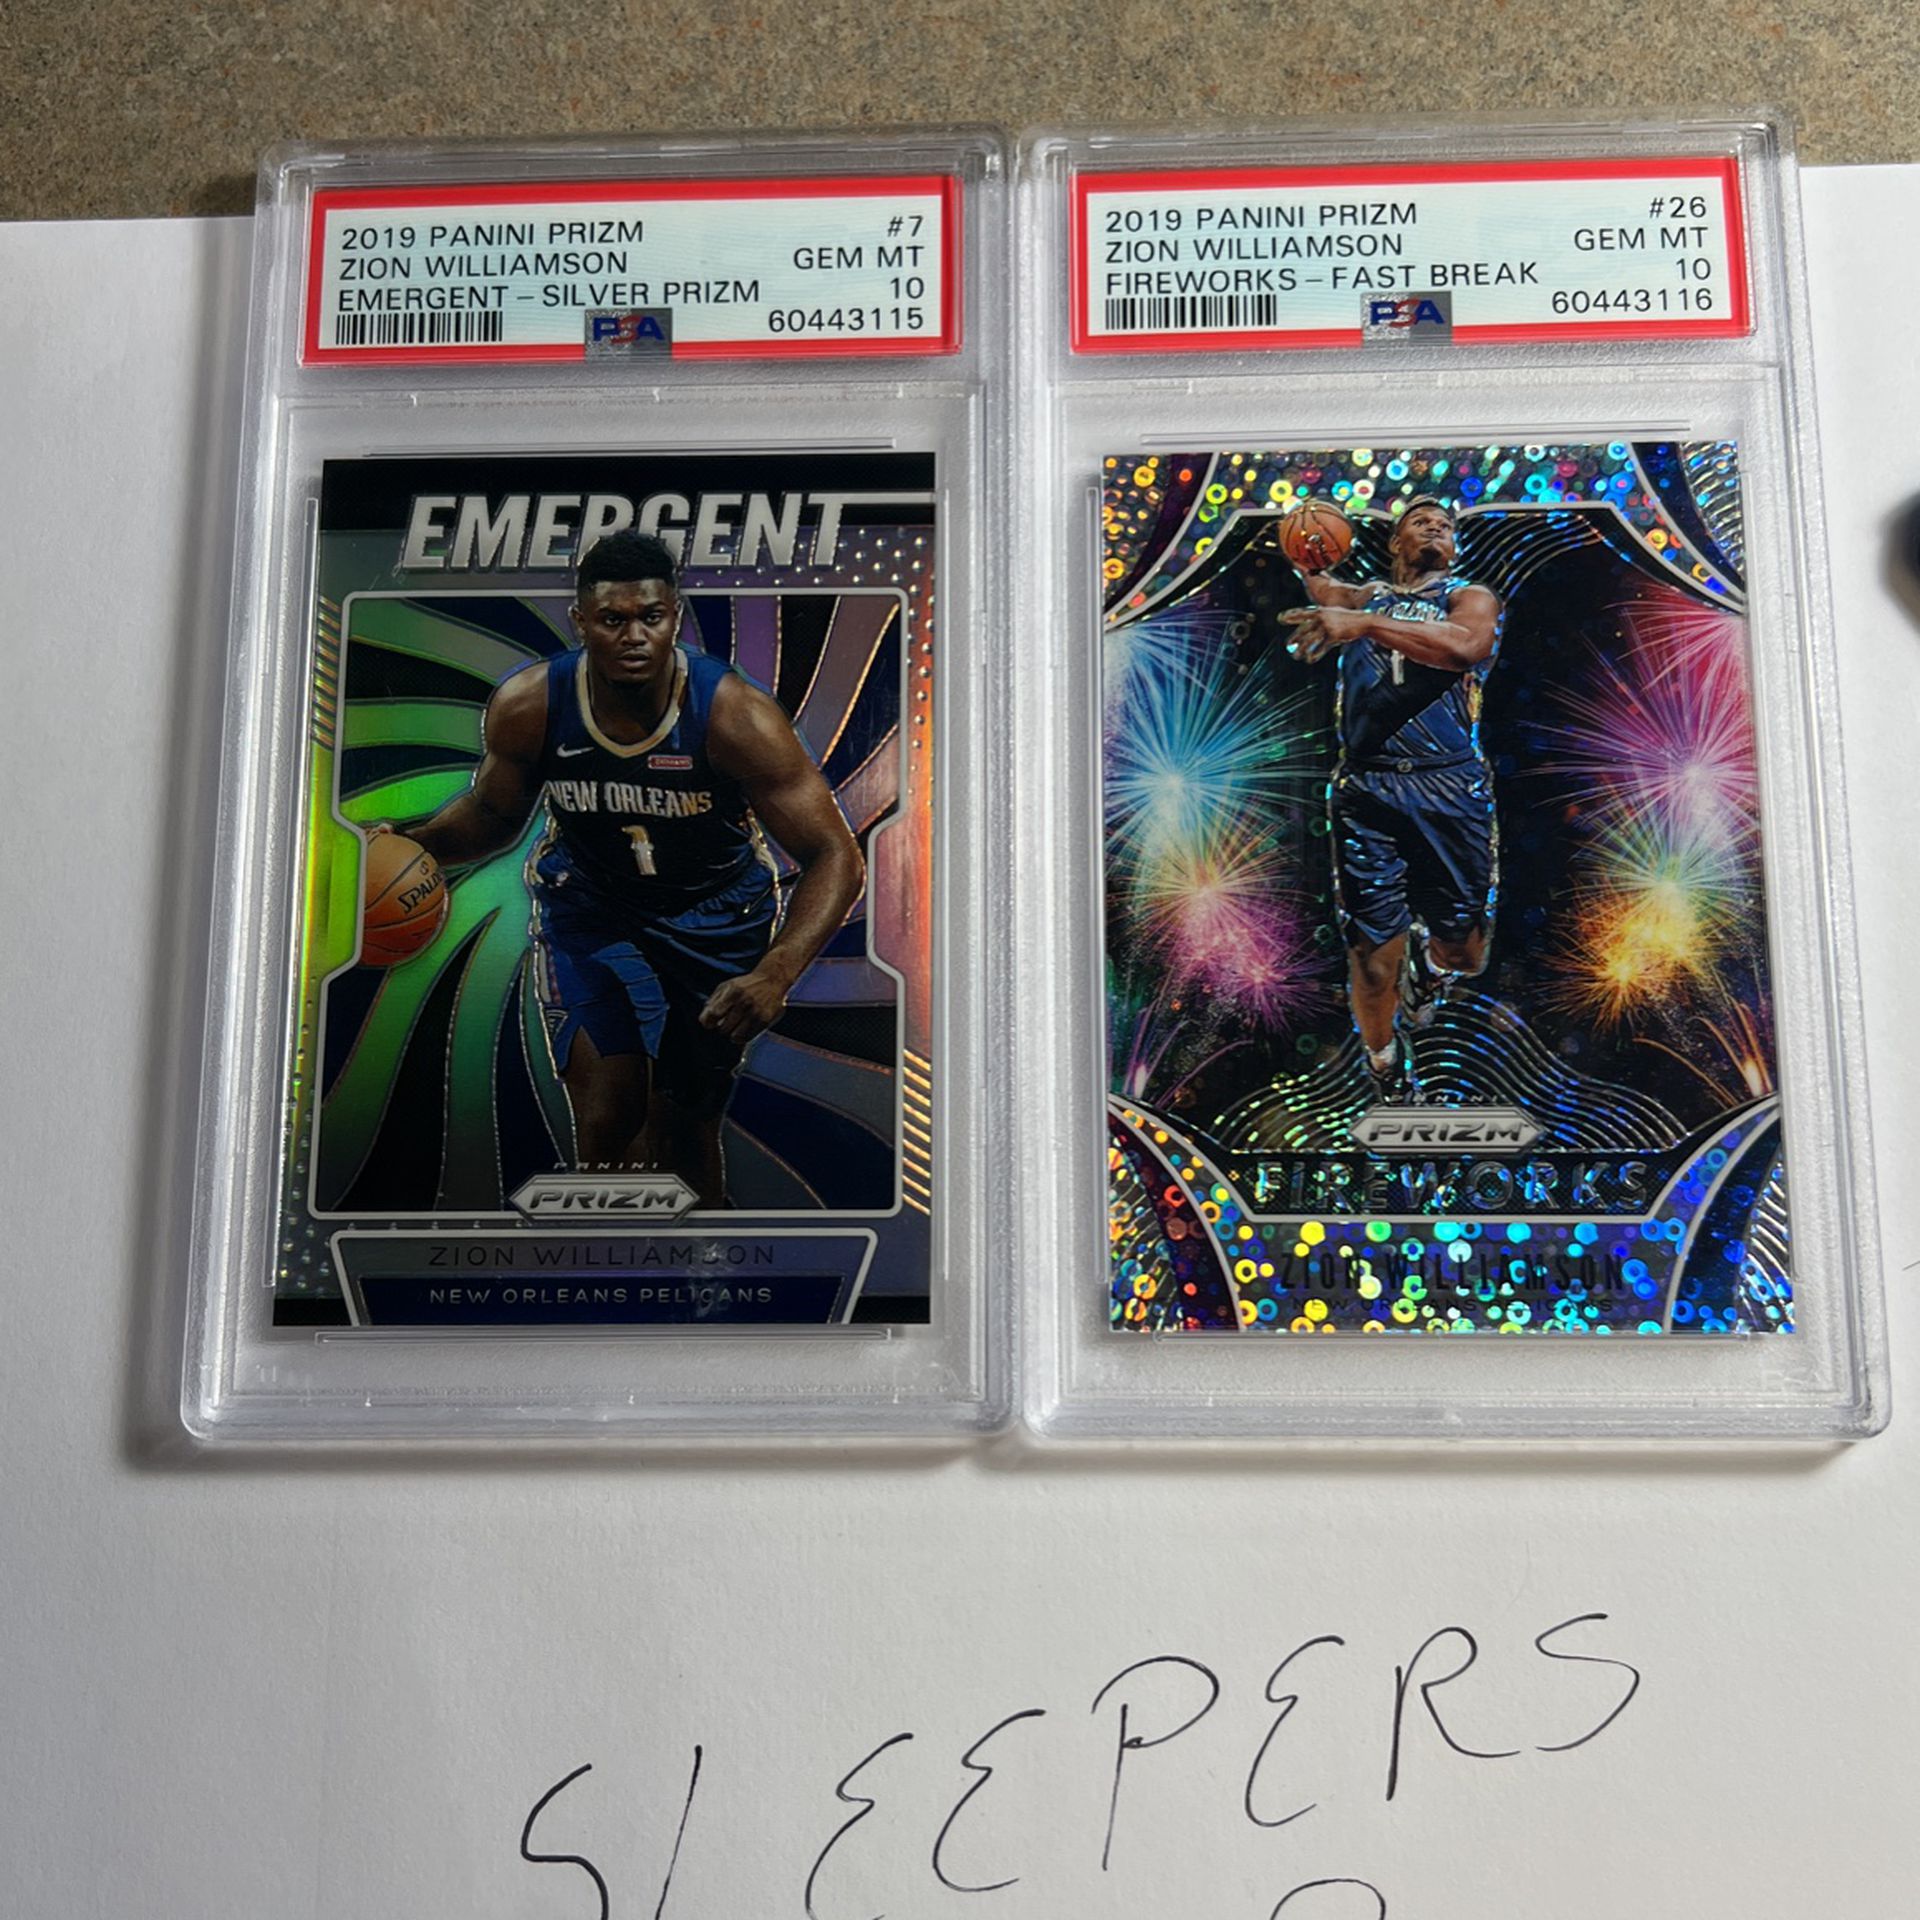 2019 lot of two Gem mint psa 10 zion williamson one Emergent and one Fireworks fast break sparkle 